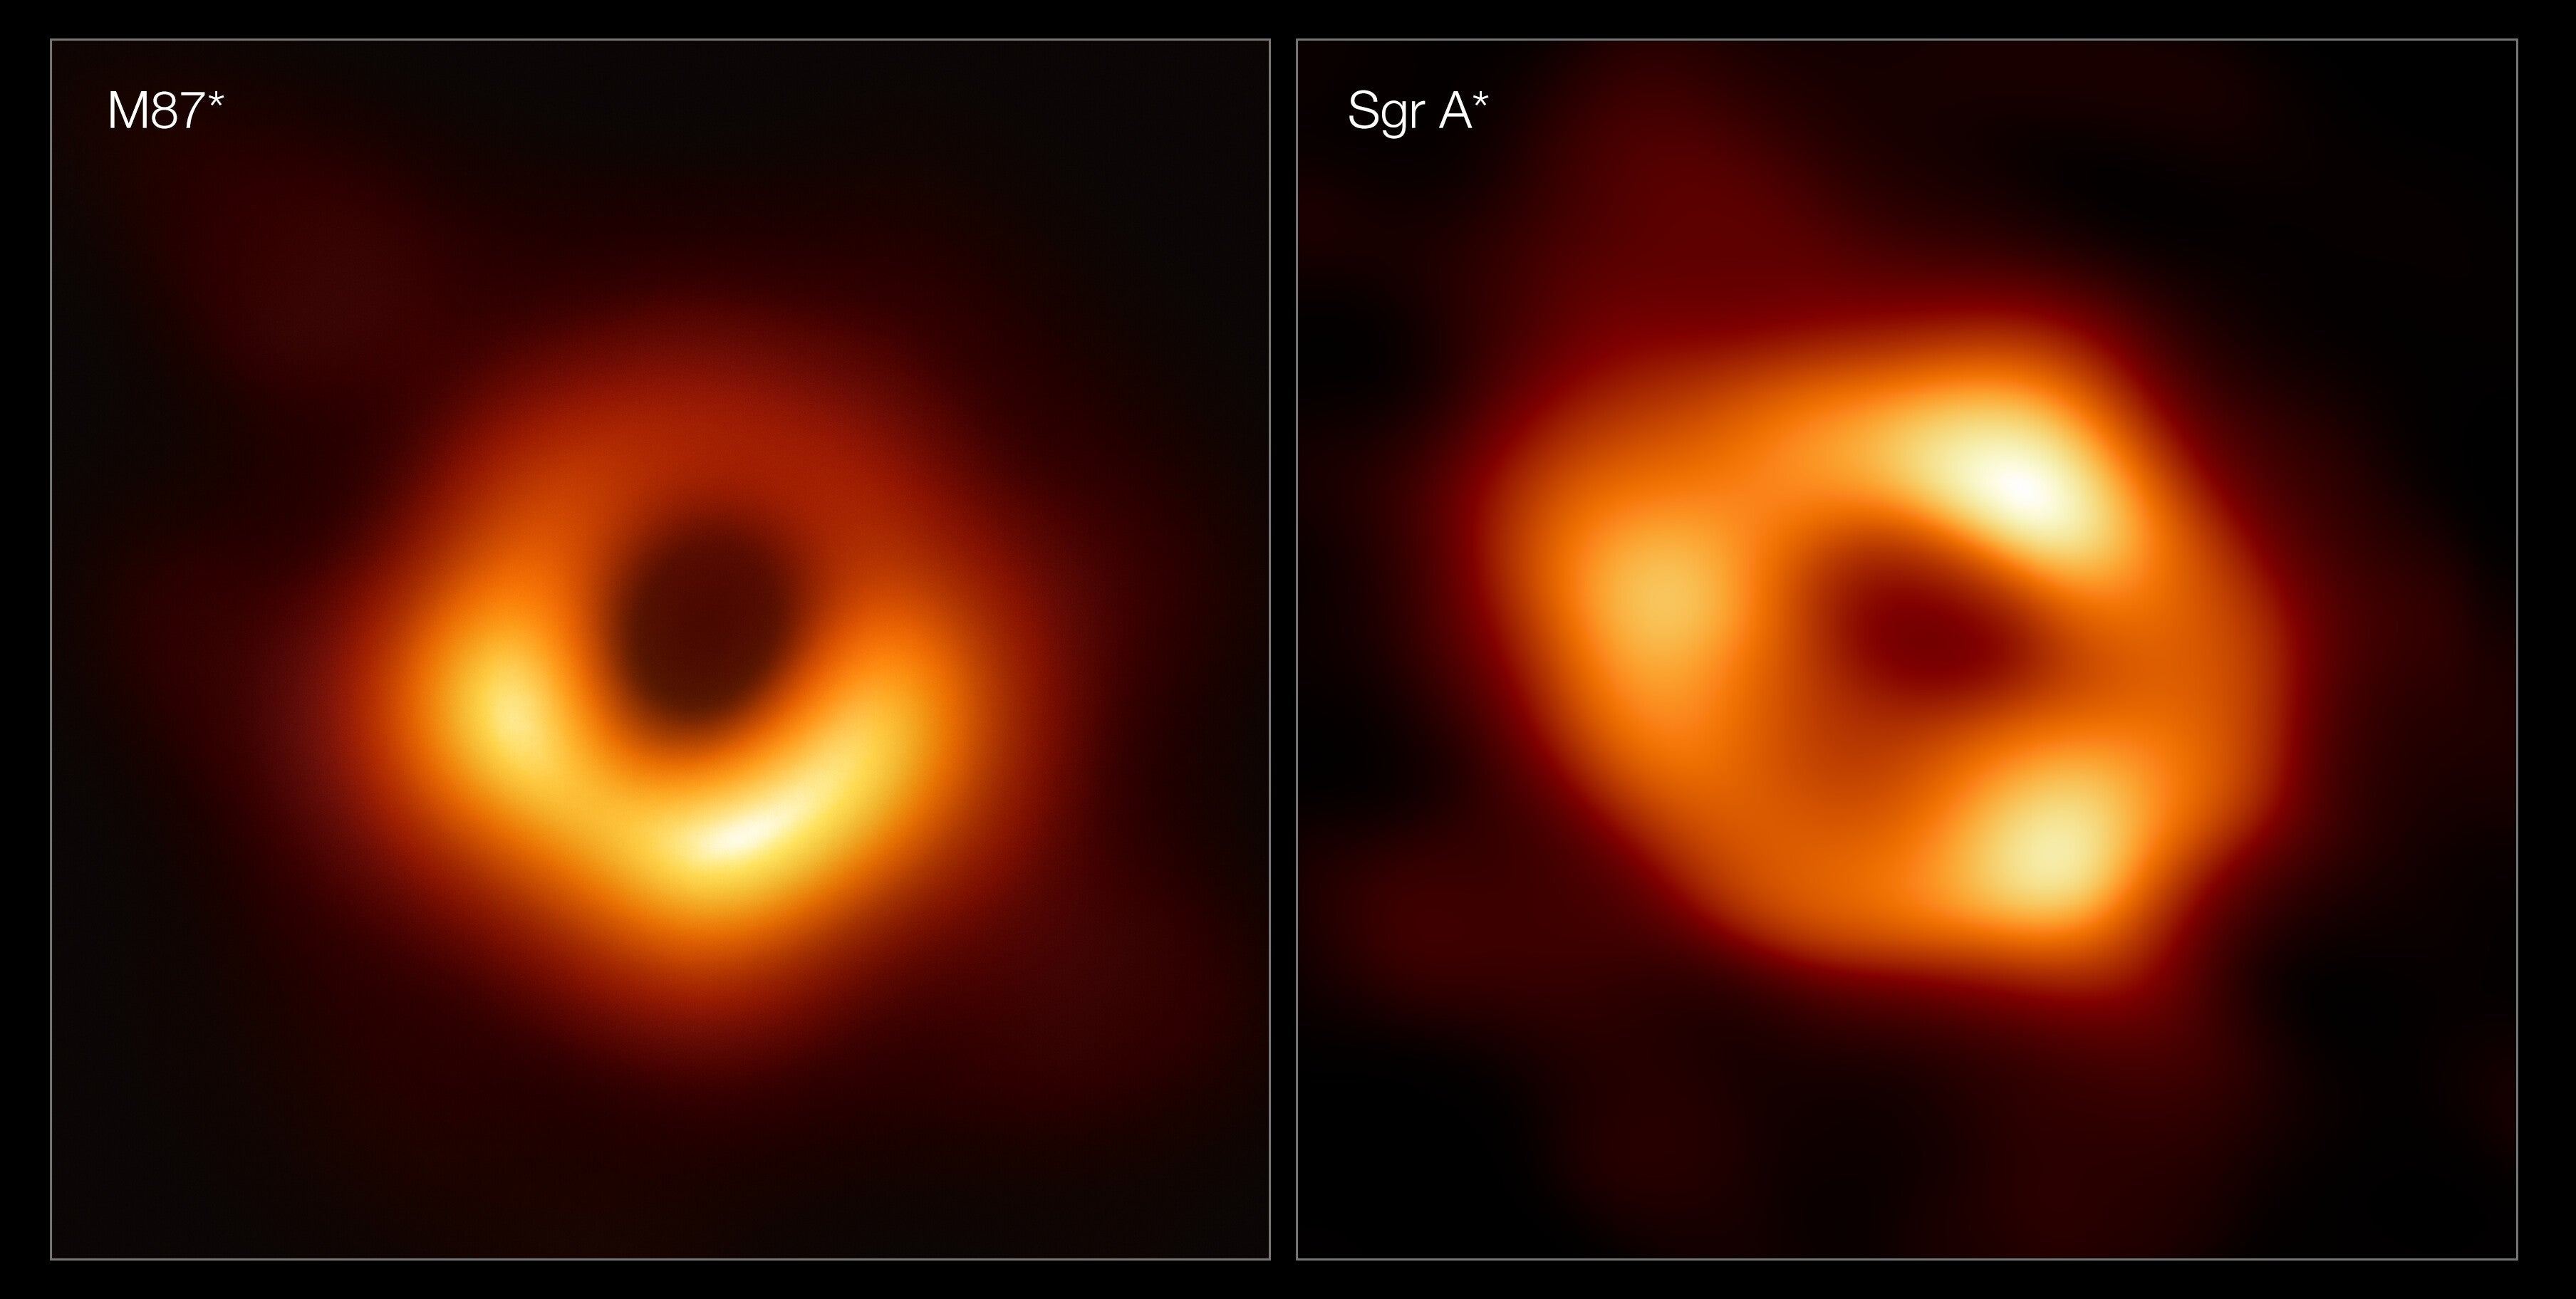 Hawking radiation is predicted to be emitted by black holes, like these two imaged by the Event Horizon Telescope. (Image: EHT Collaboration)